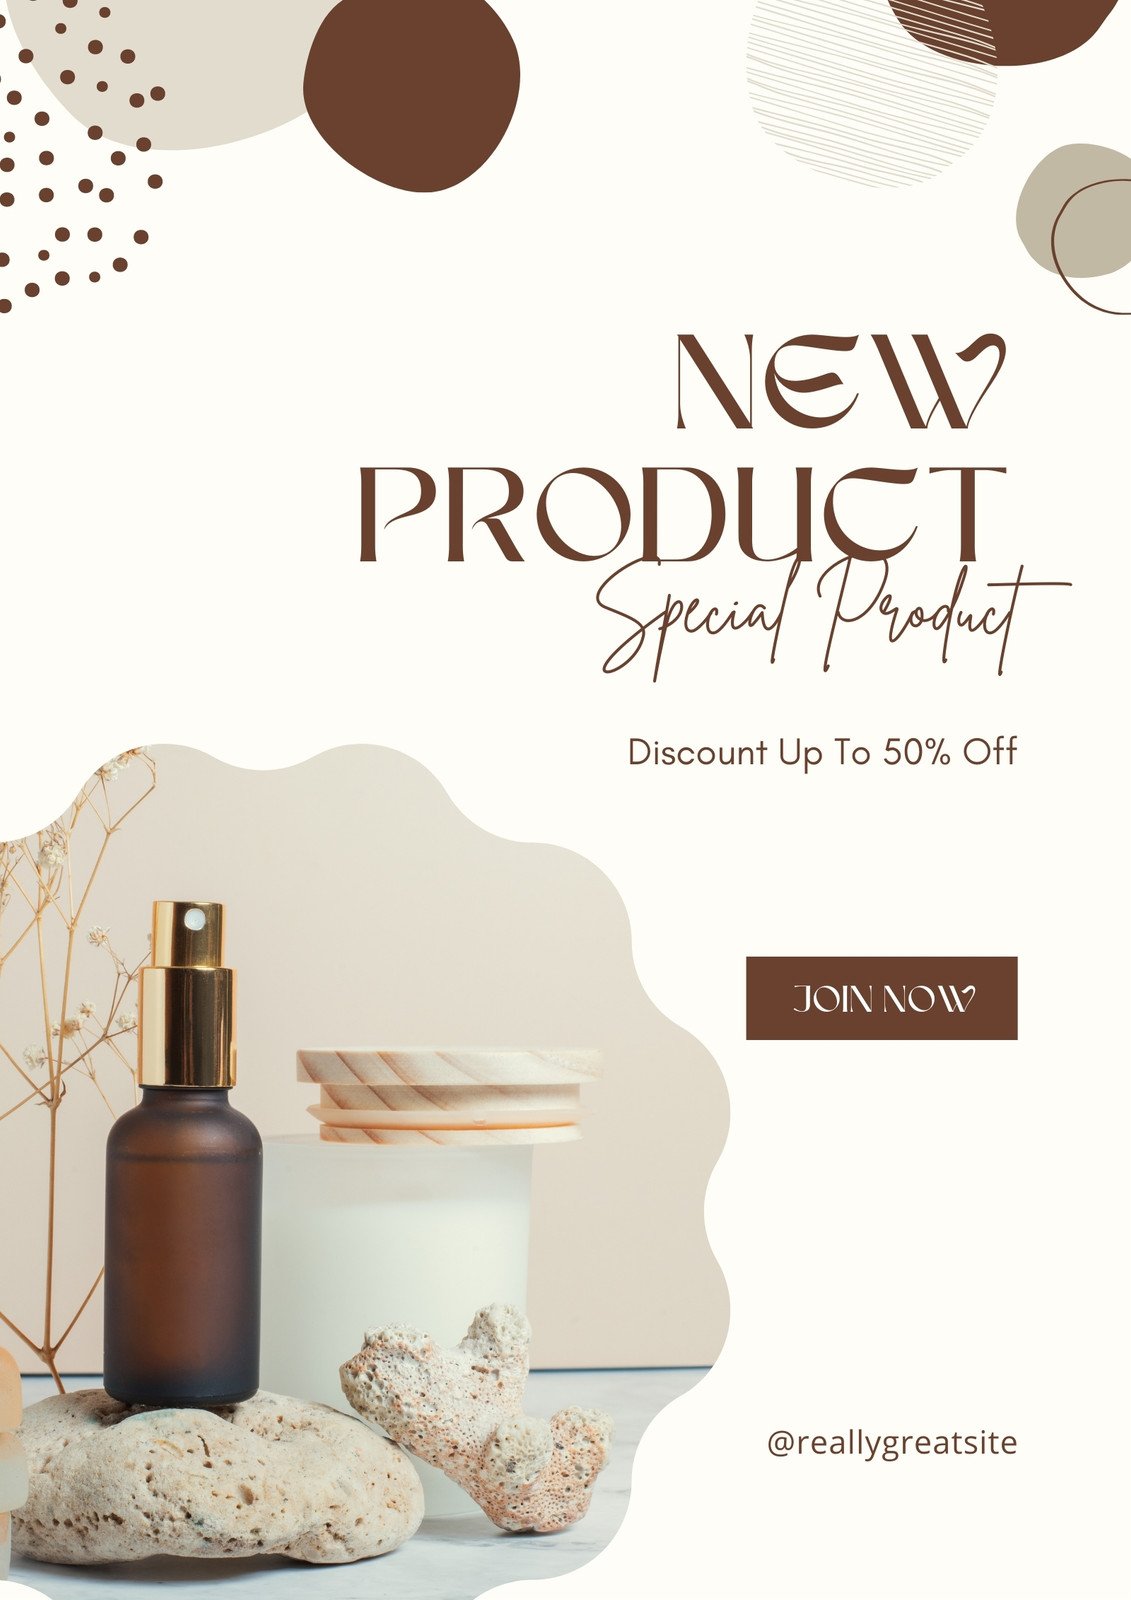 Product Launch Flyer Images - Free Download on Freepik